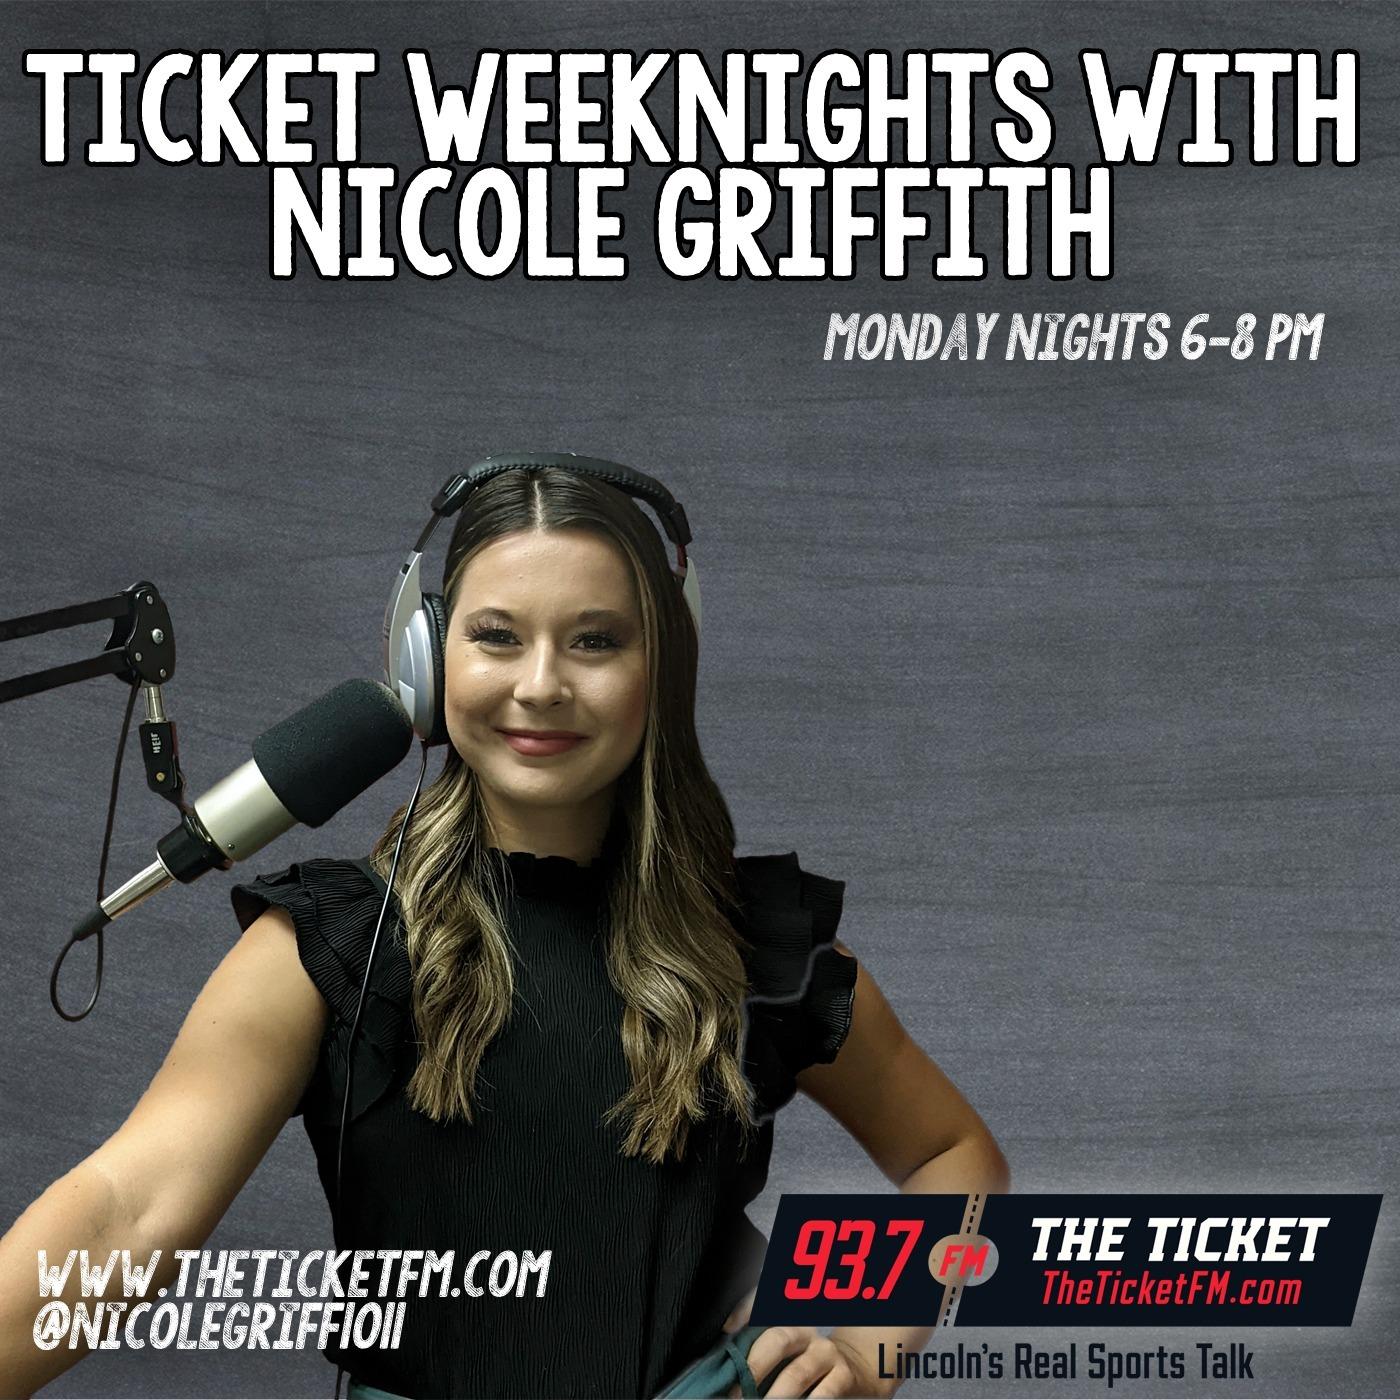 Ticket Weeknights w/ Nicole Griffith - 93.7 The Ticket KNTK